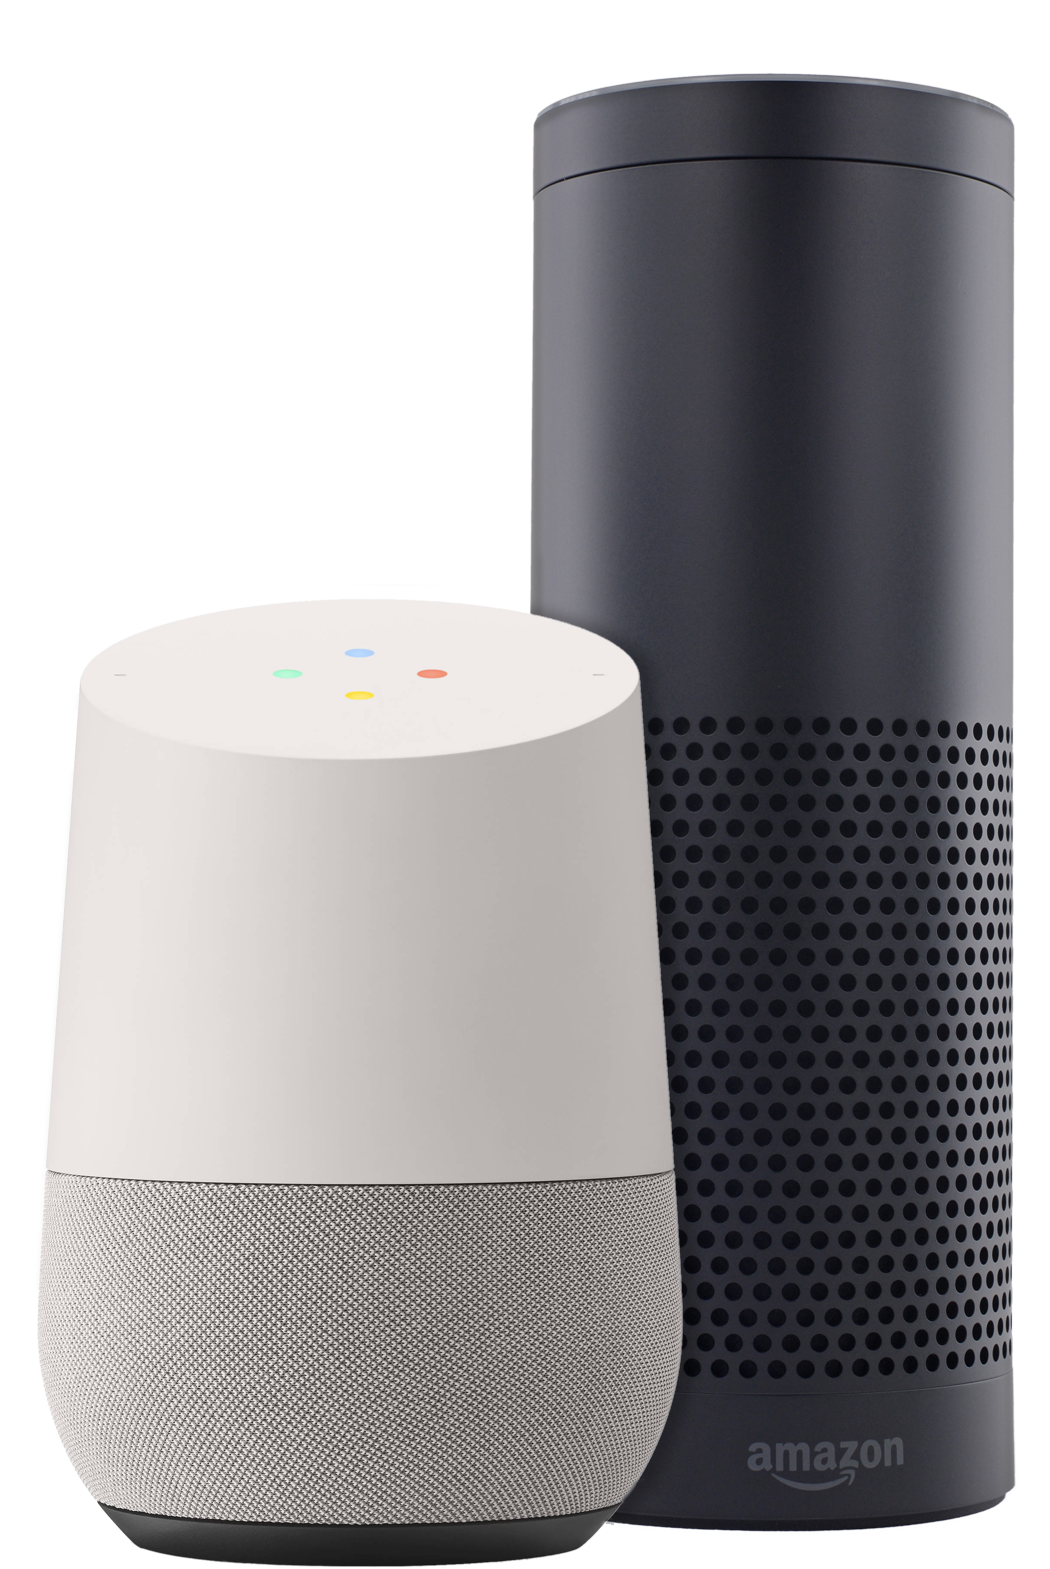 Google Home and Amazon Echo devices